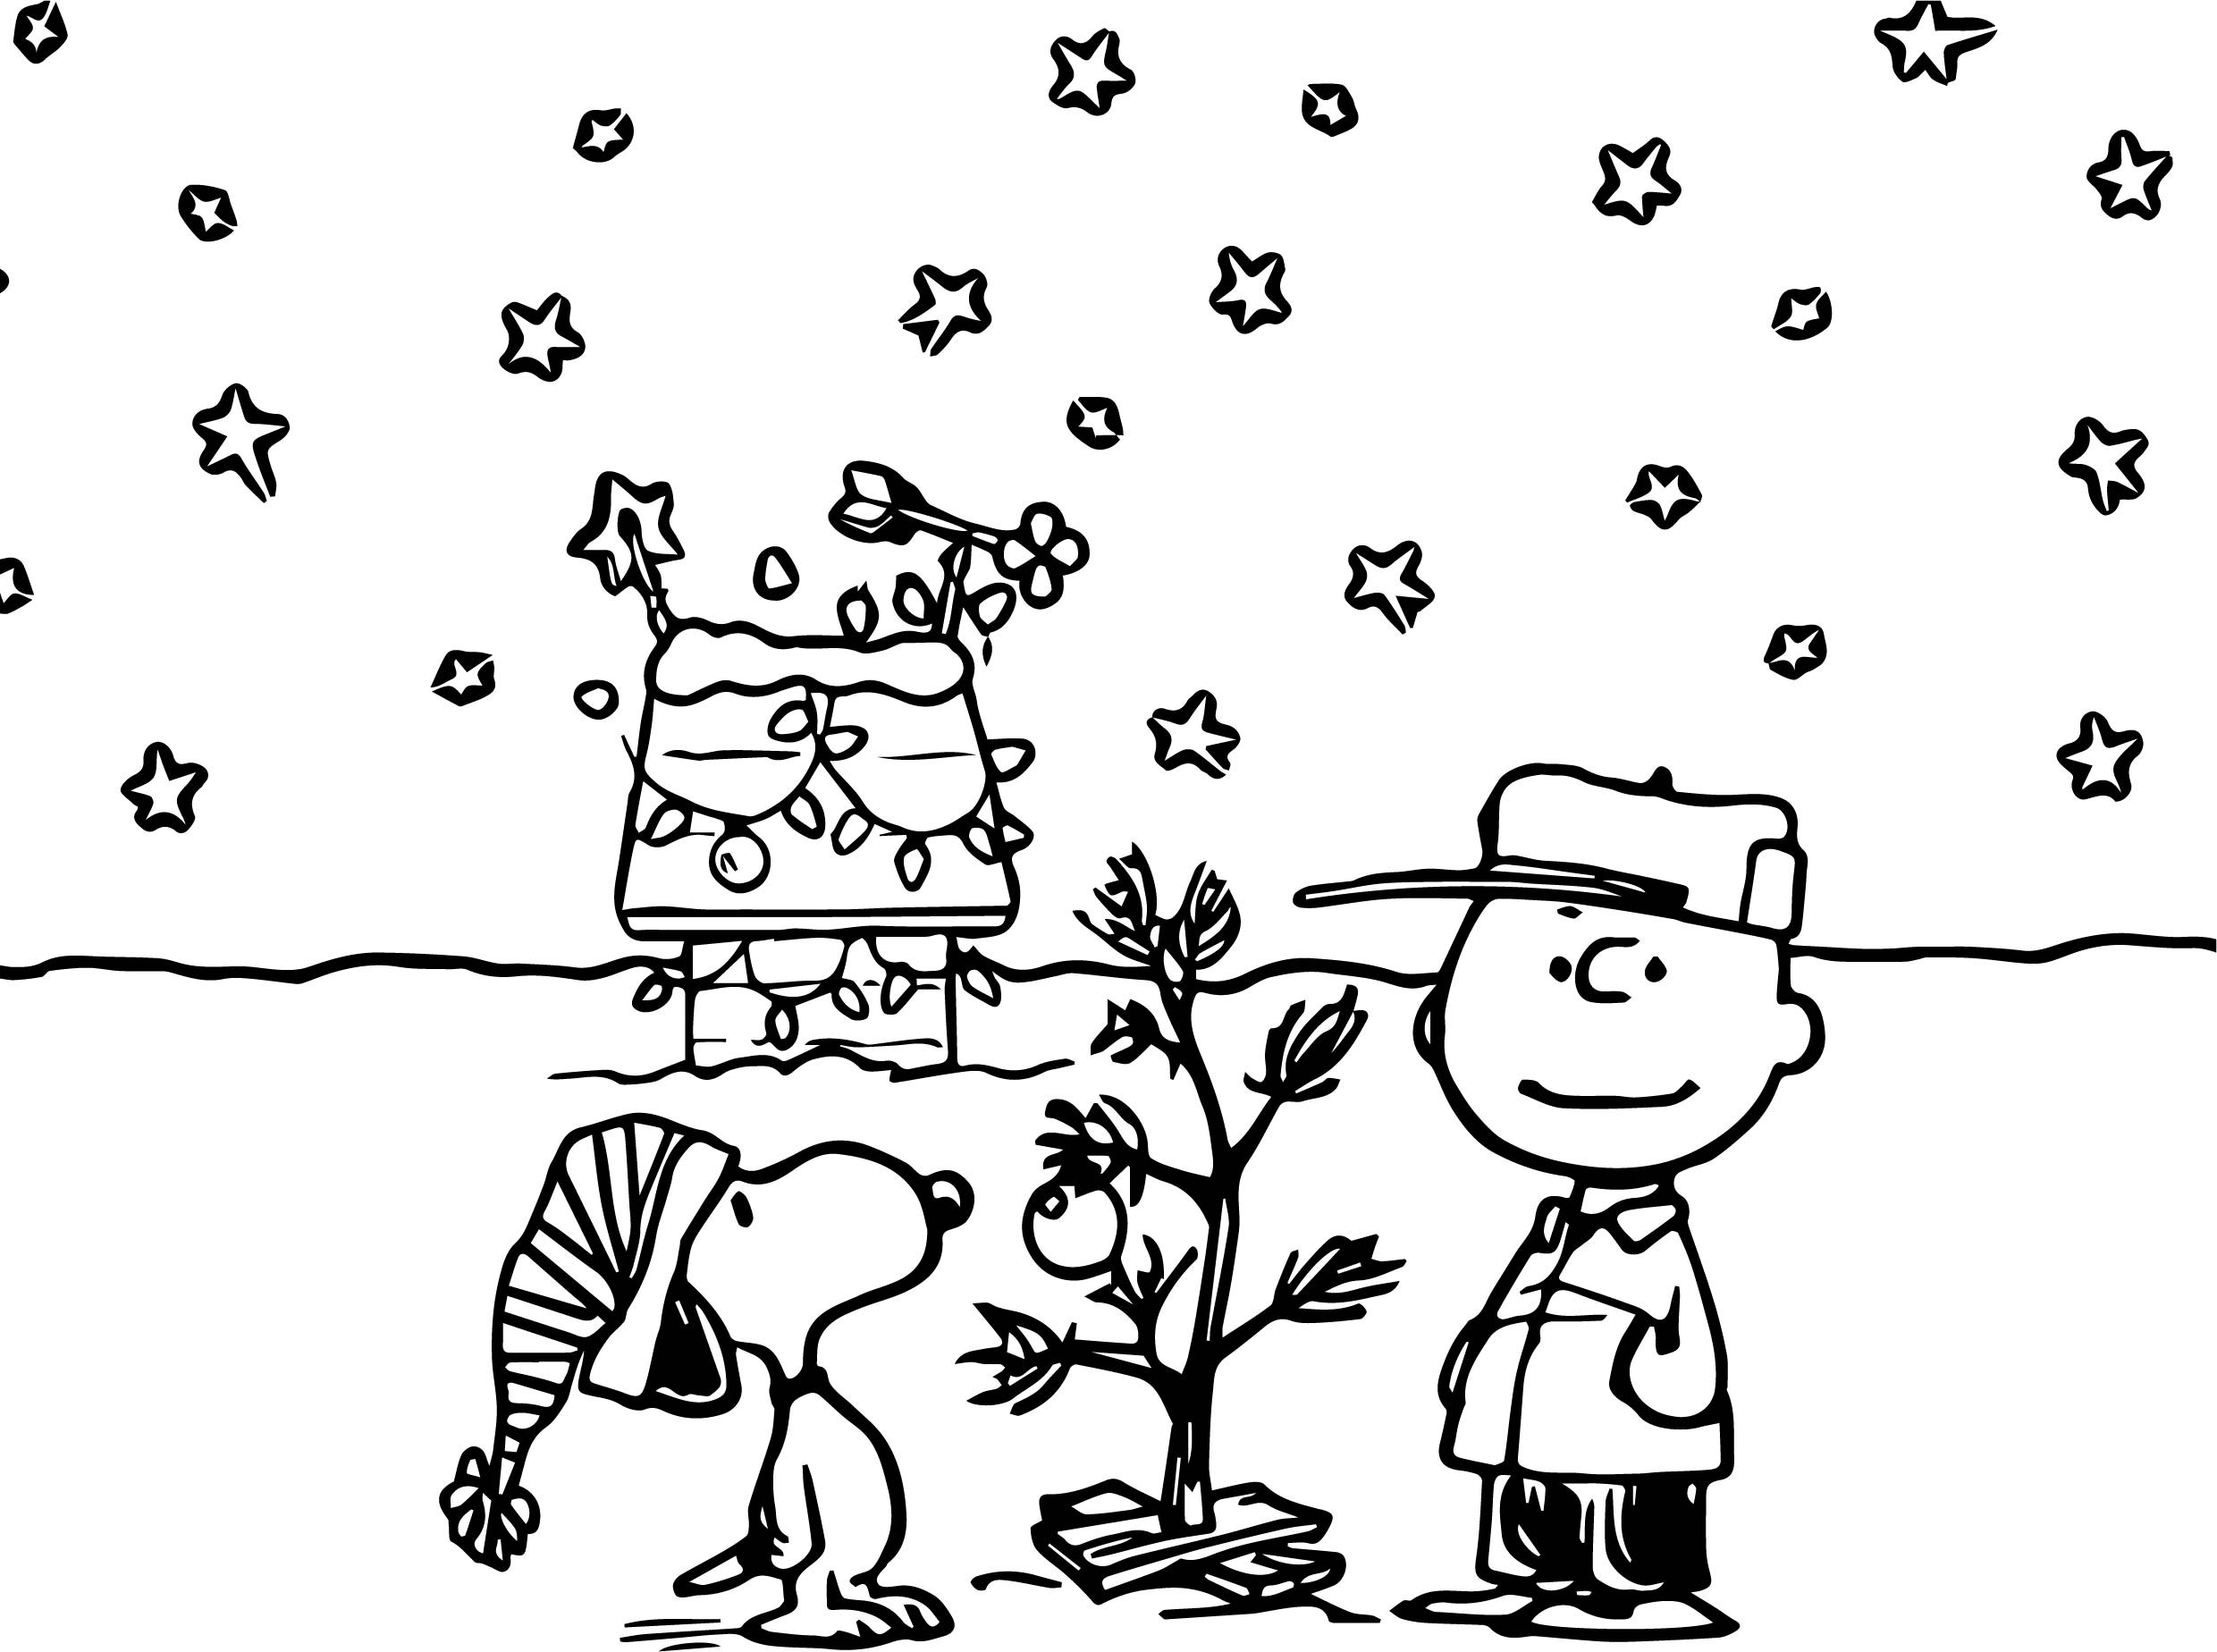 Charlie Brown Christmas Coloring Pages at GetColorings.com | Free